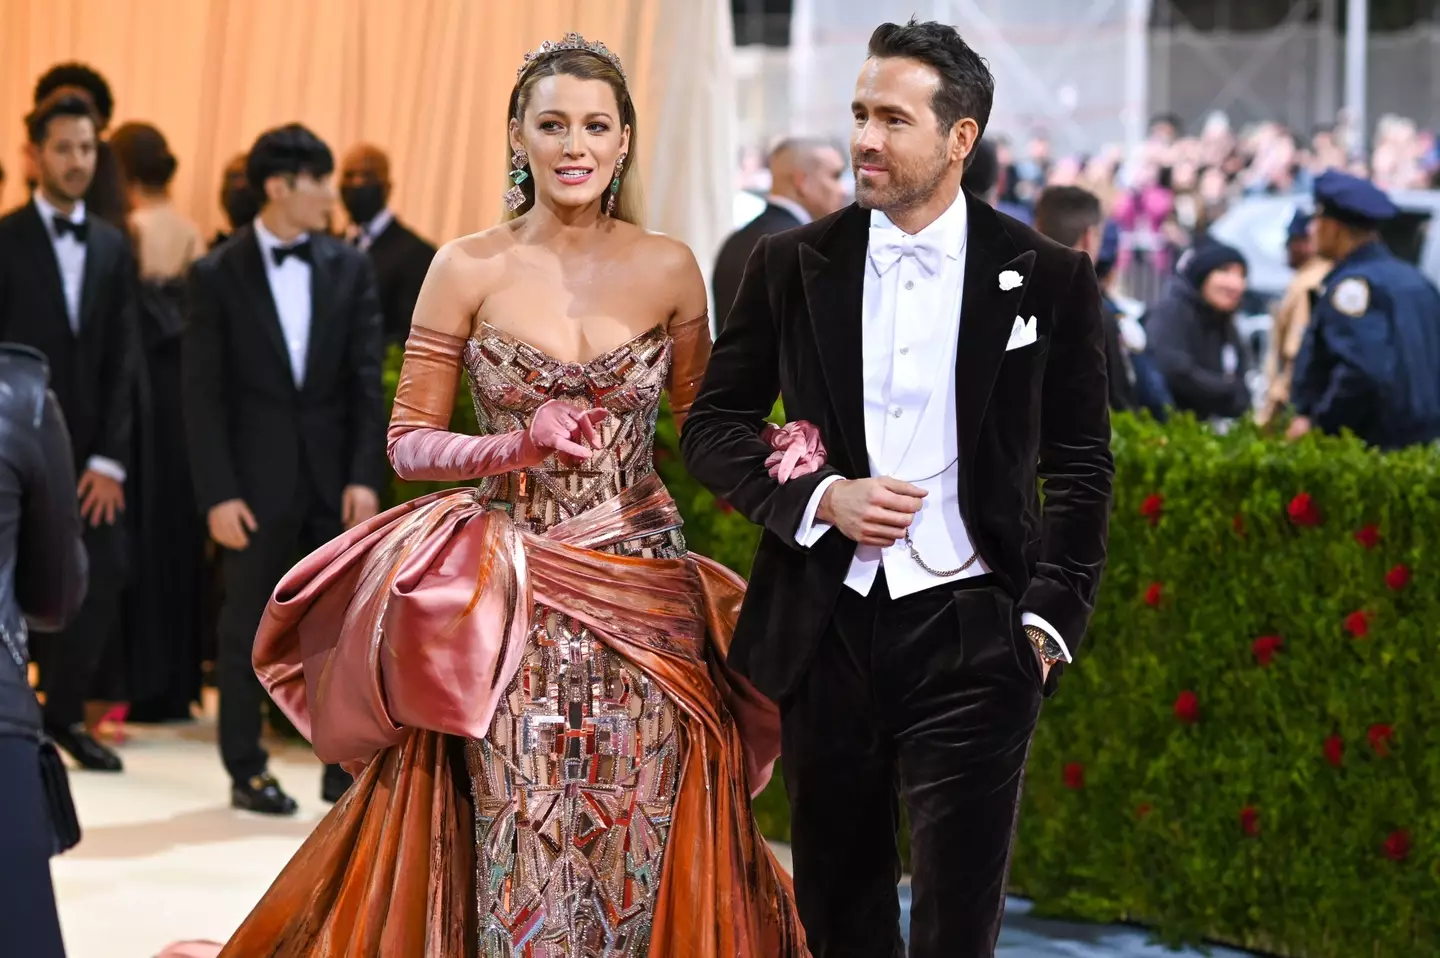 Blake Lively and Ryan Reynolds co-chaired the gala. (